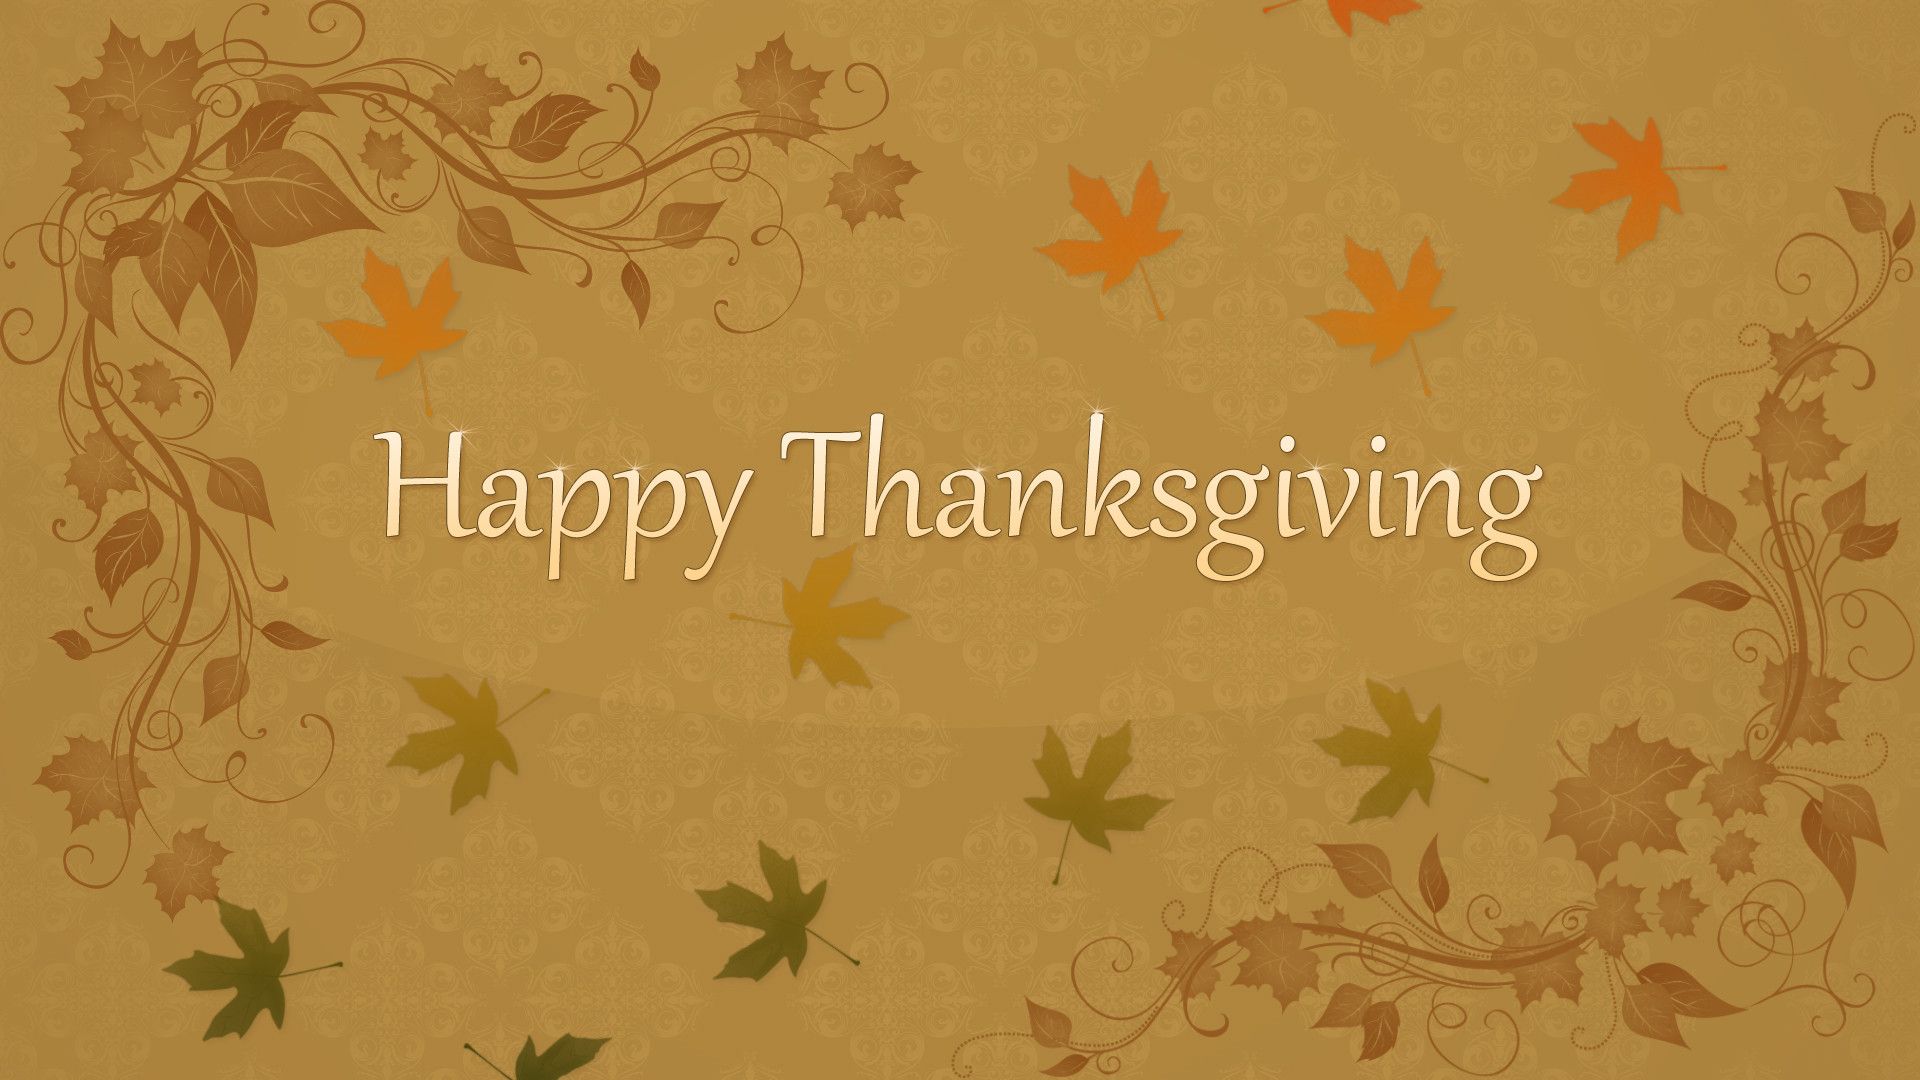 Happy Thanksgiving Backgrounds - Thanksgiving Wallpaper For Computer - HD Wallpaper 